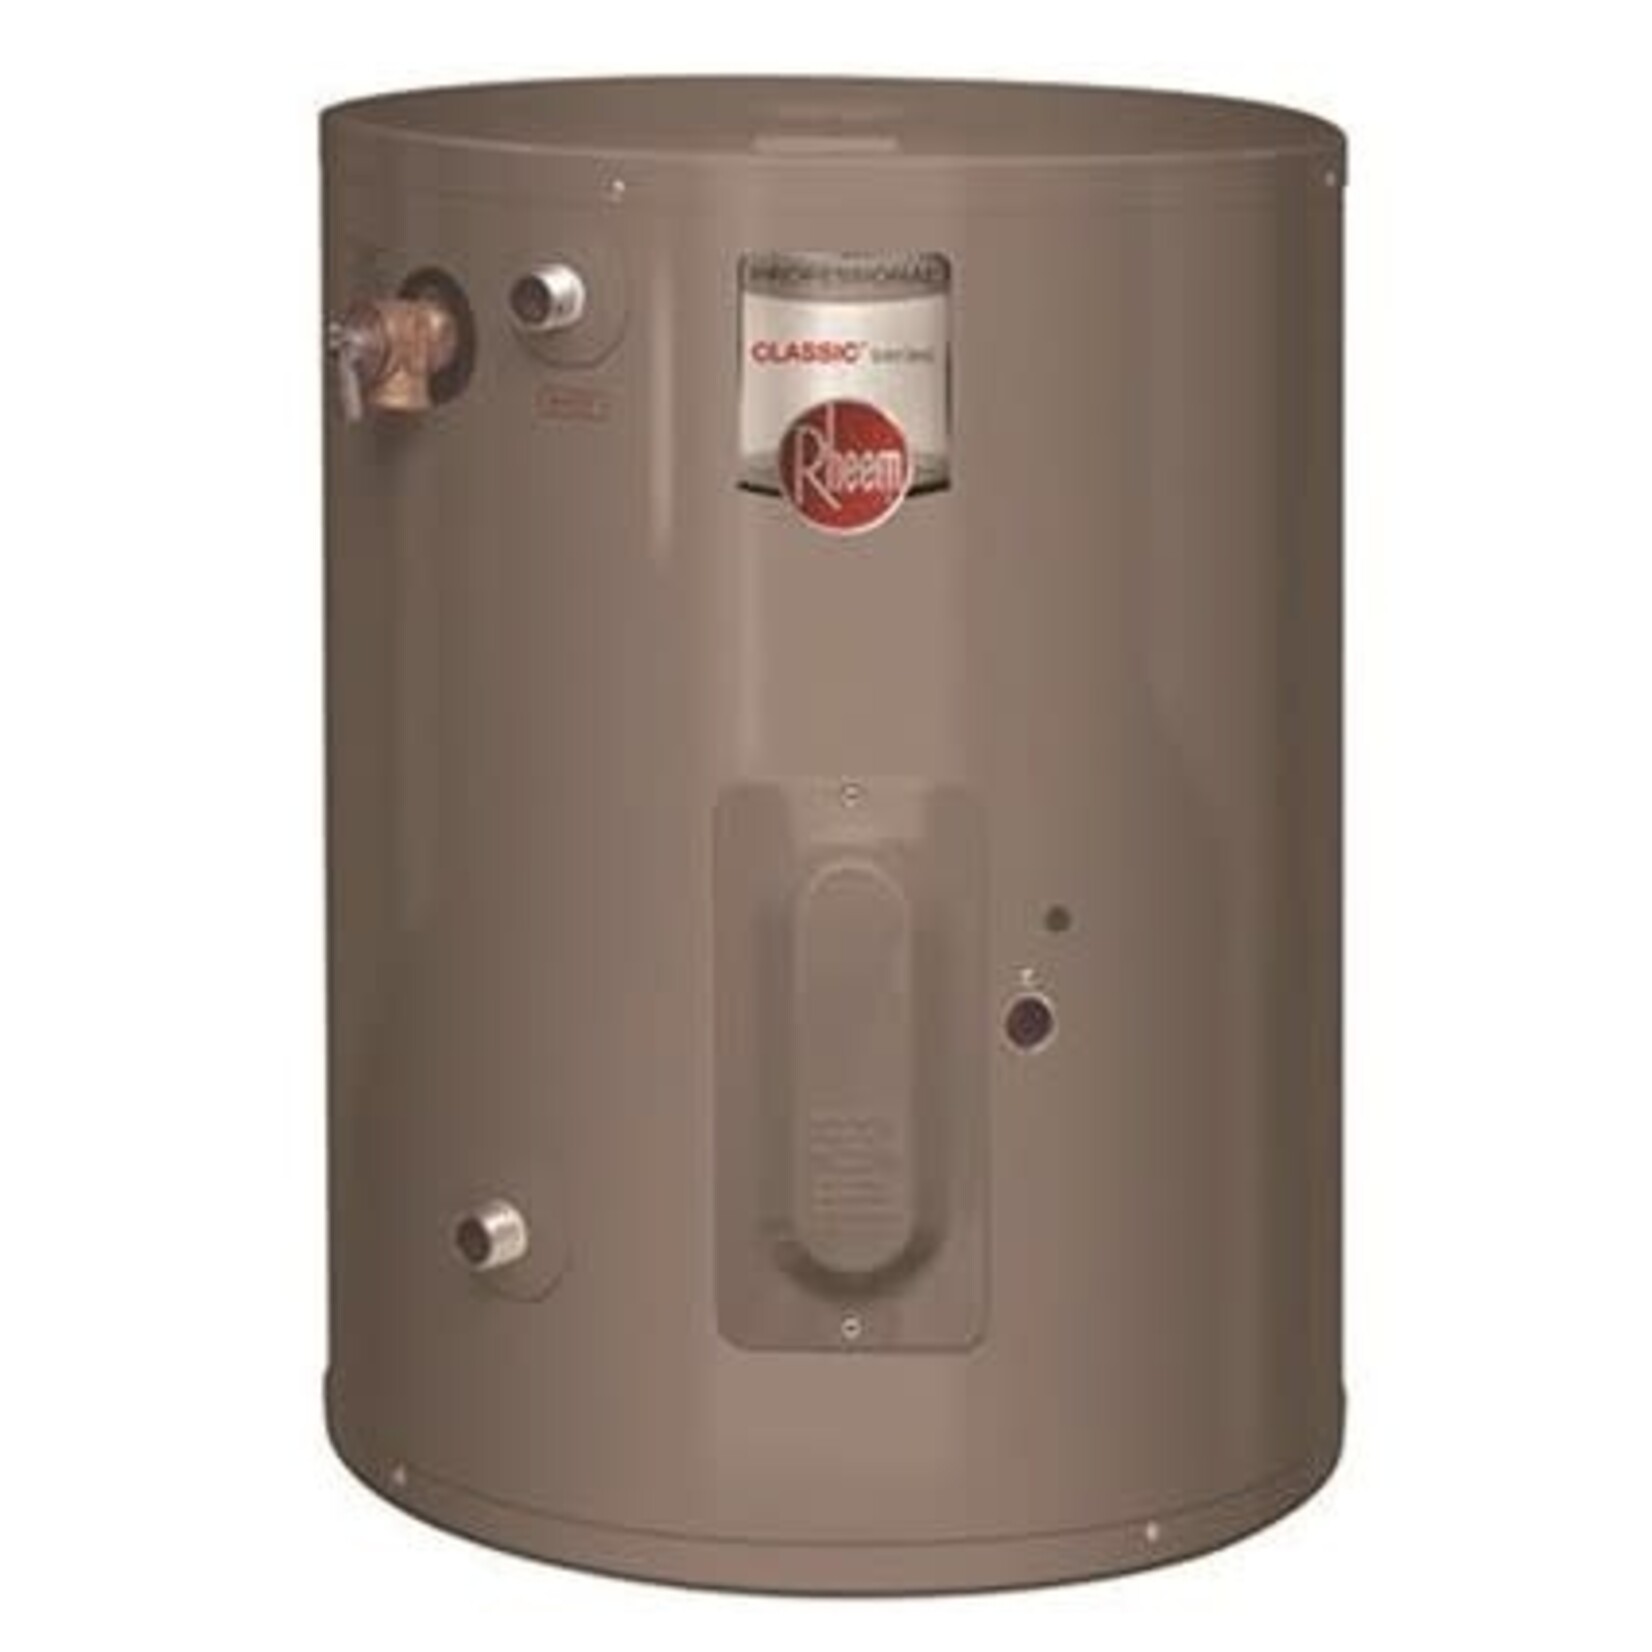 RHEEM RHEEM PROFESSIONAL CLASSIC 6 GAL. 120-VOLT POINT OF USE ELECTRIC WATER HEATER WITH SIDE T AND P RELIEF VALVE